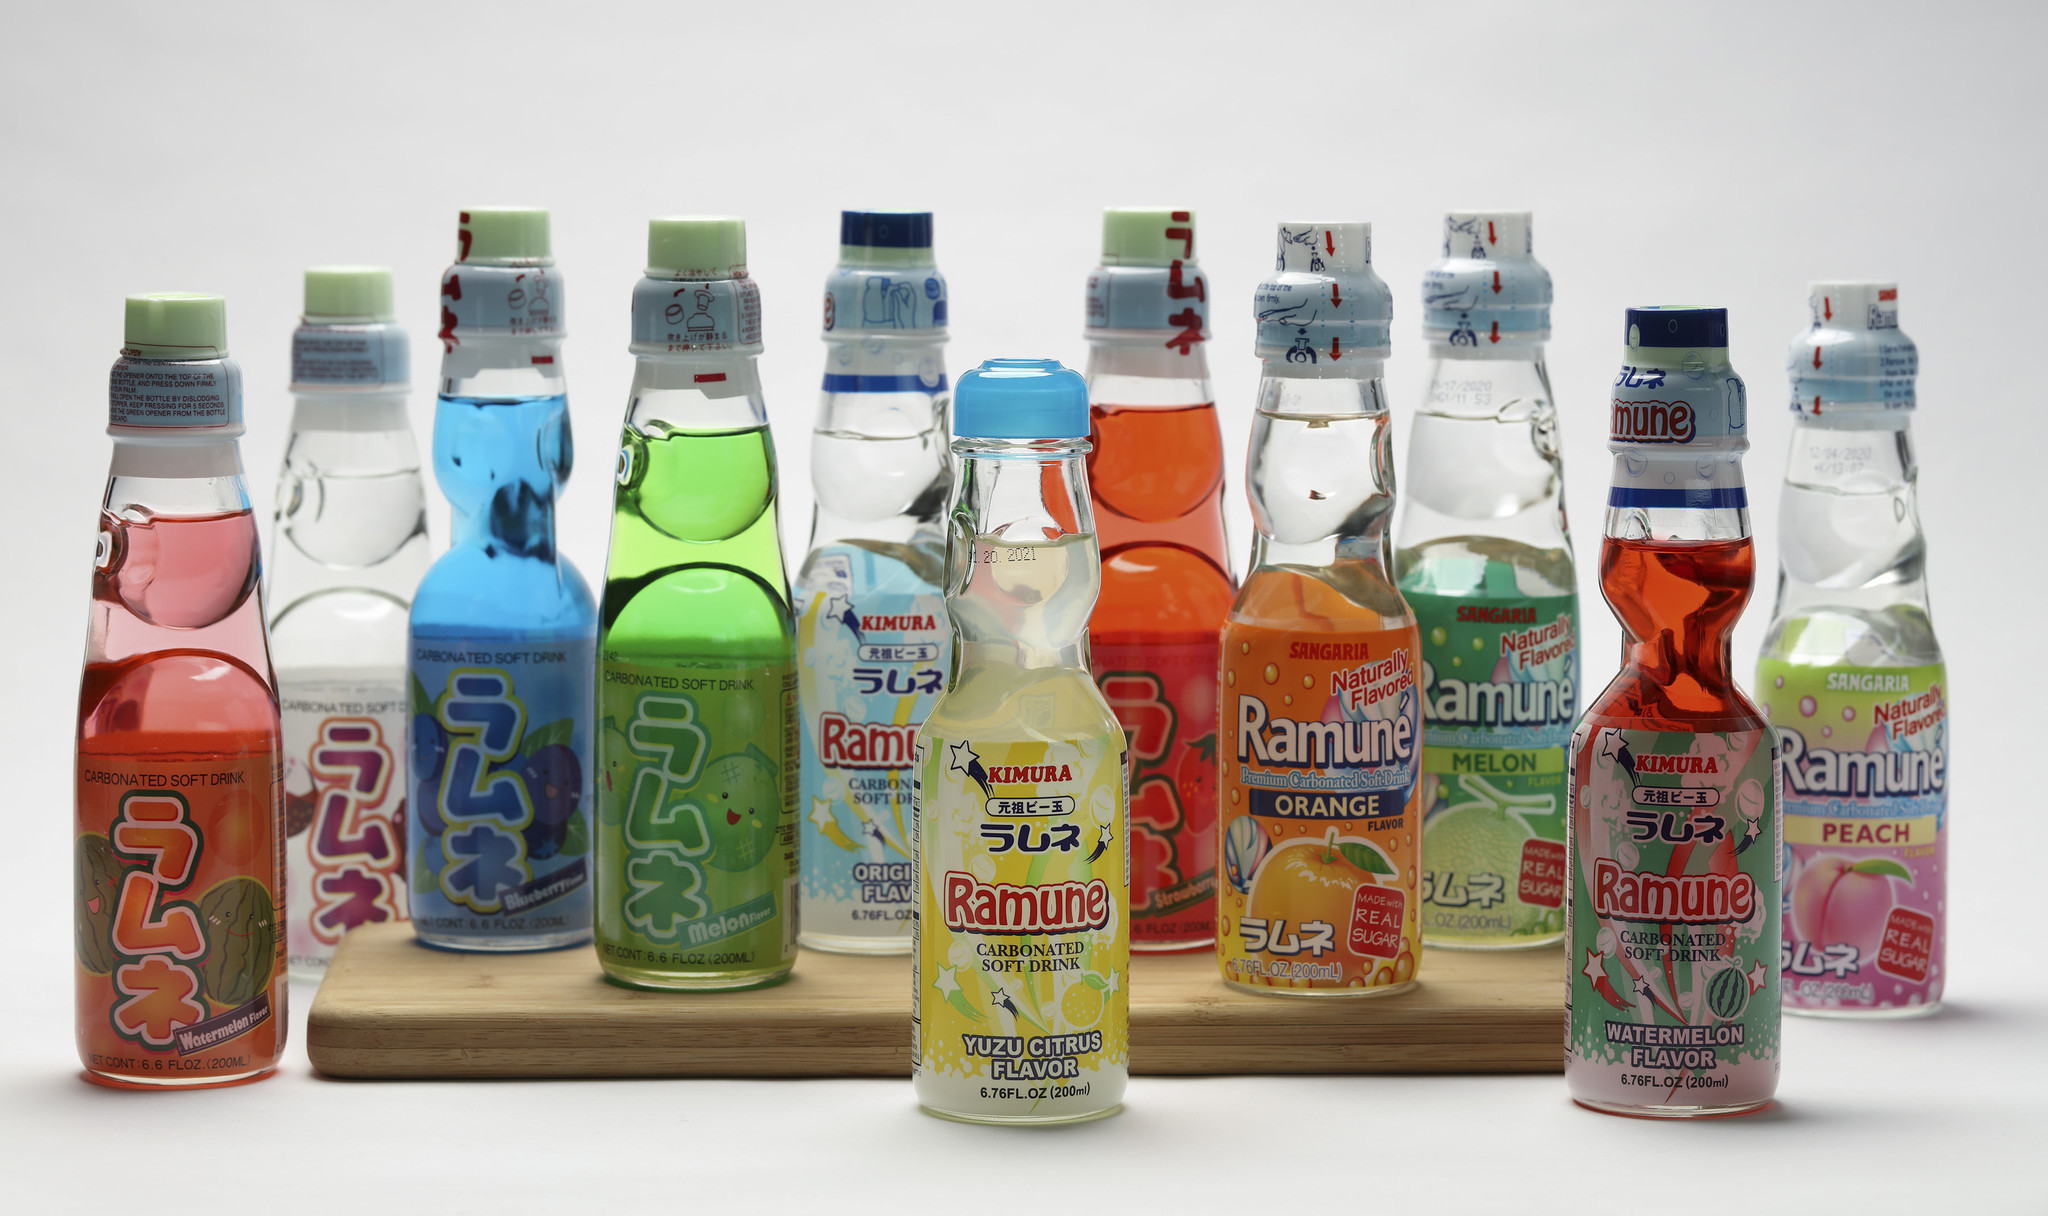 We tried Ramune Japanese soda to find the